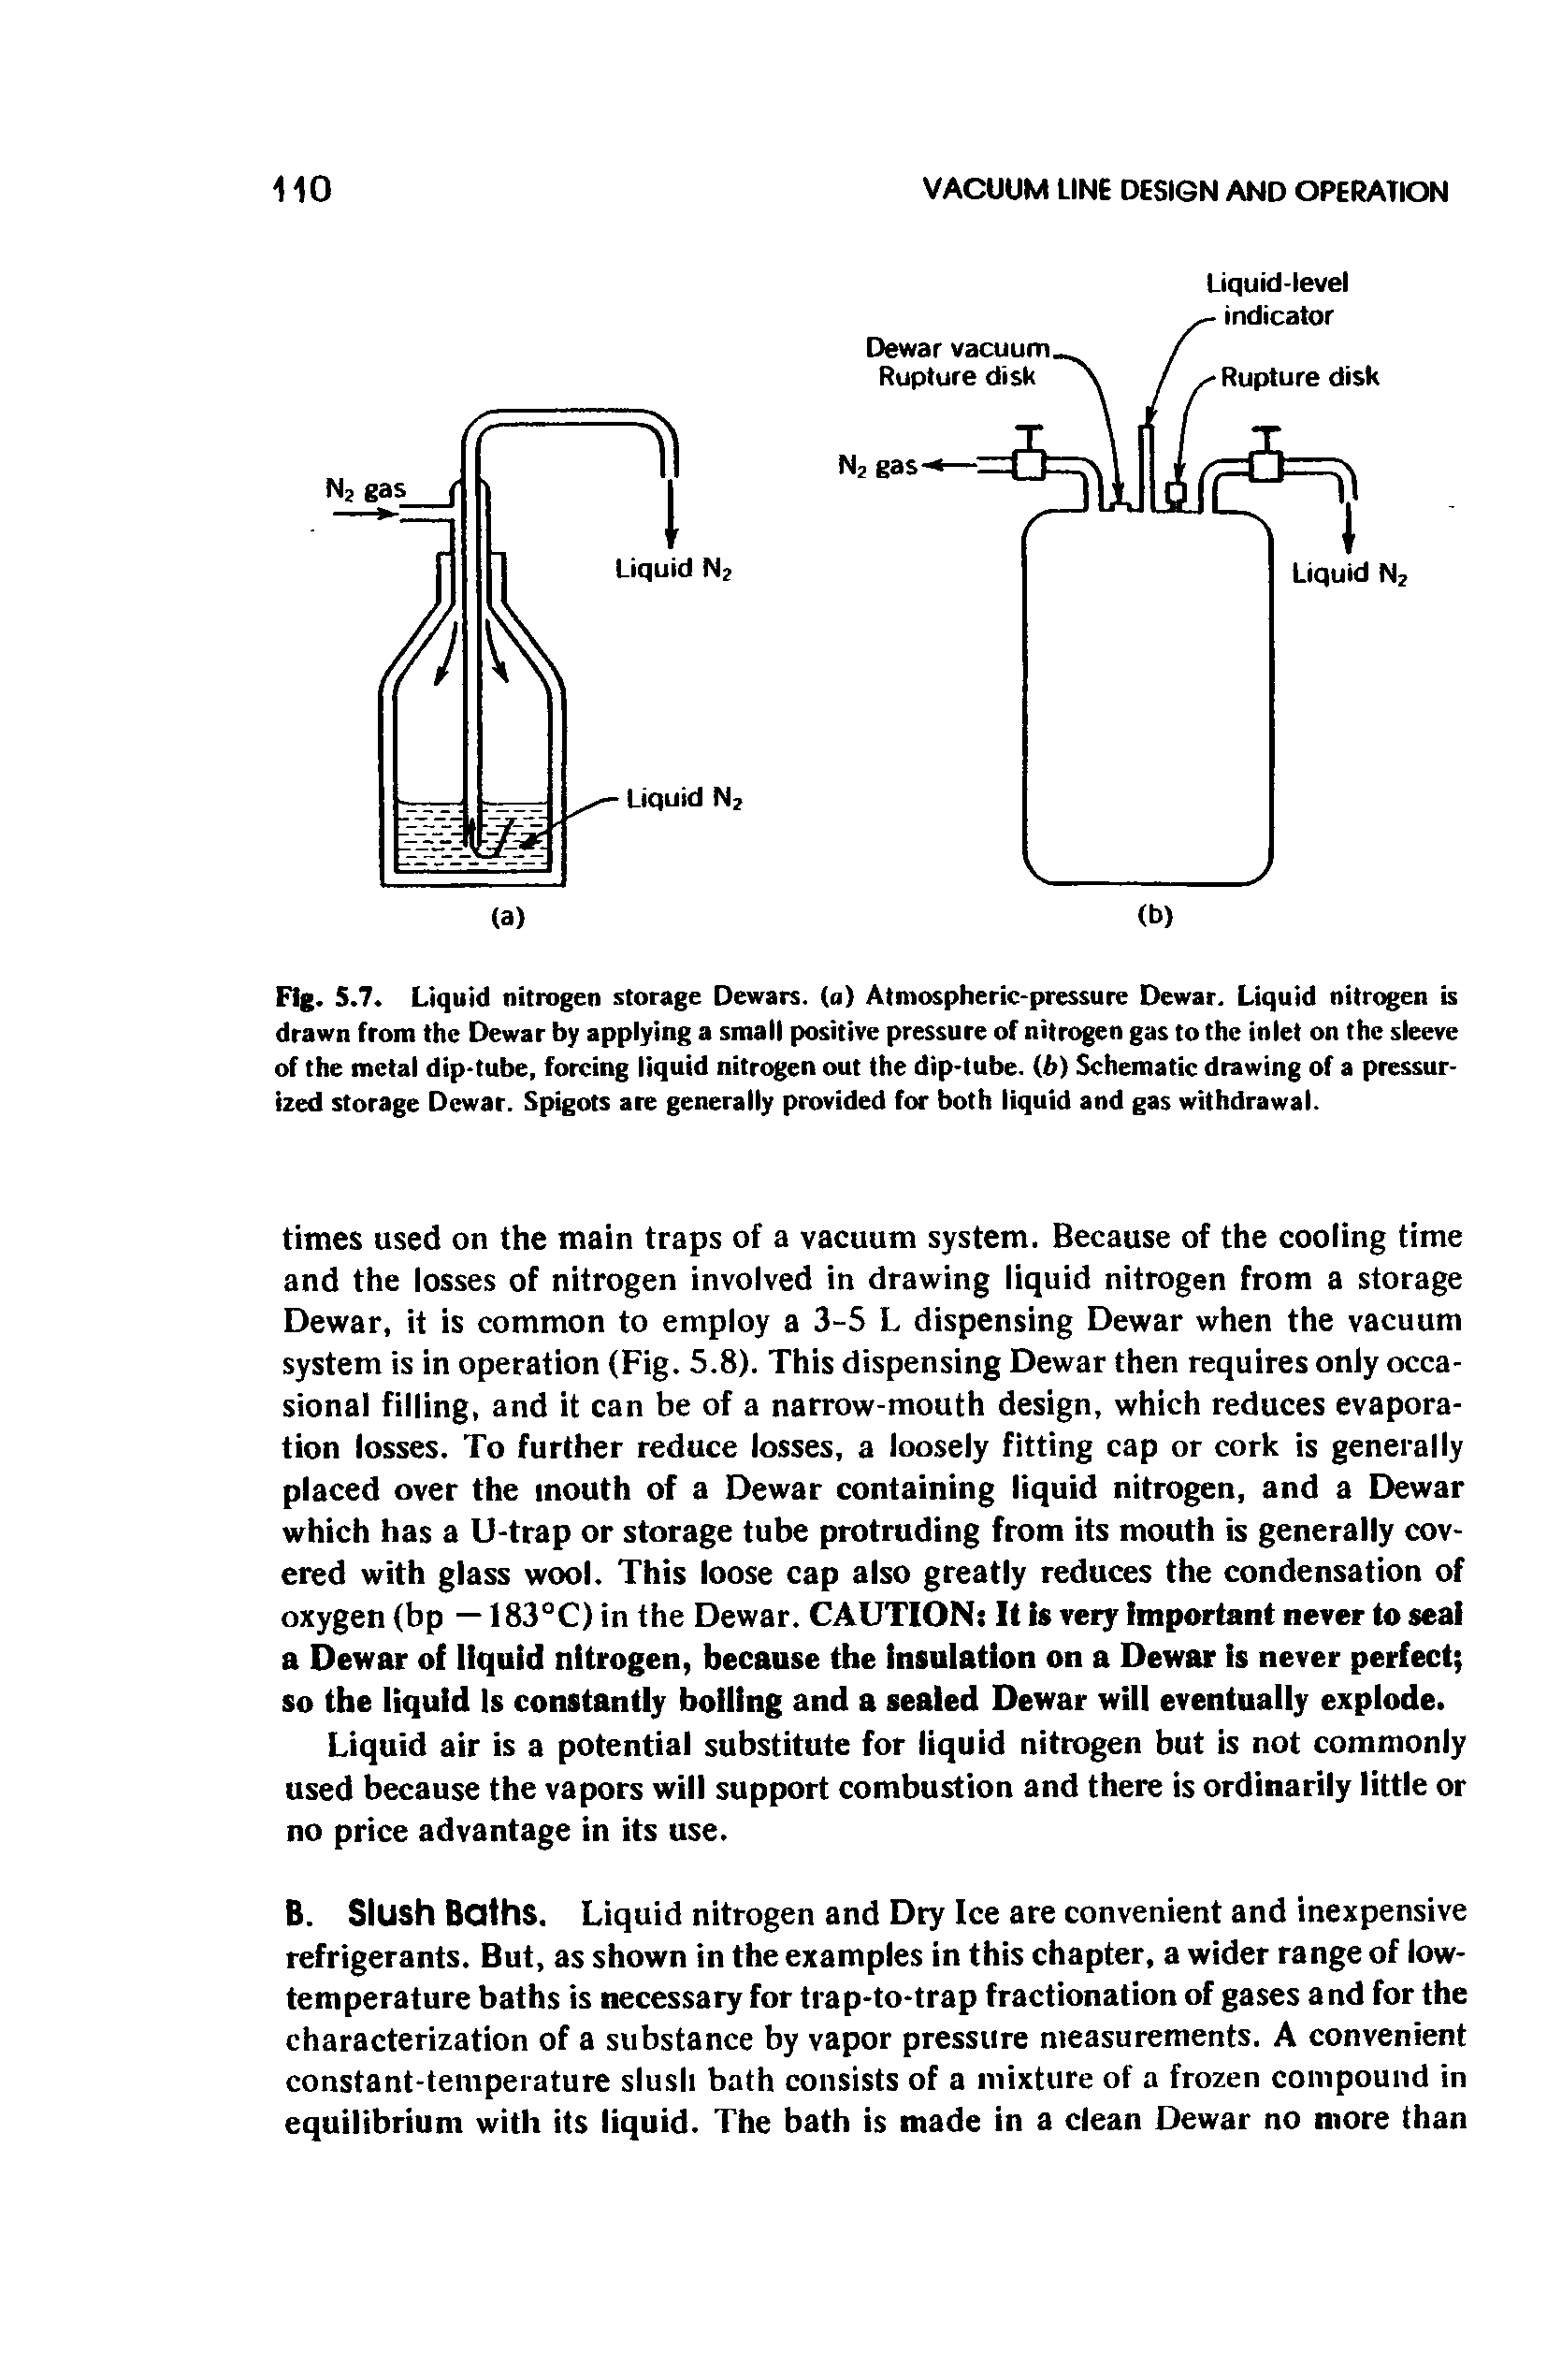 Fig. 5.7. Liquid nitrogen storage Dewars, (a) Atmospheric-pressure Dewar. Liquid nitrogen is drawn from the Dewar by applying a small positive pressure of nitrogen gas to the inlet on the sleeve of the metal dip-tube, forcing liquid nitrogen out the dip-tube. (f>) Schematic drawing of a pressurized storage Dewar. Spigots arc generally provided for both liquid and gas withdrawal.